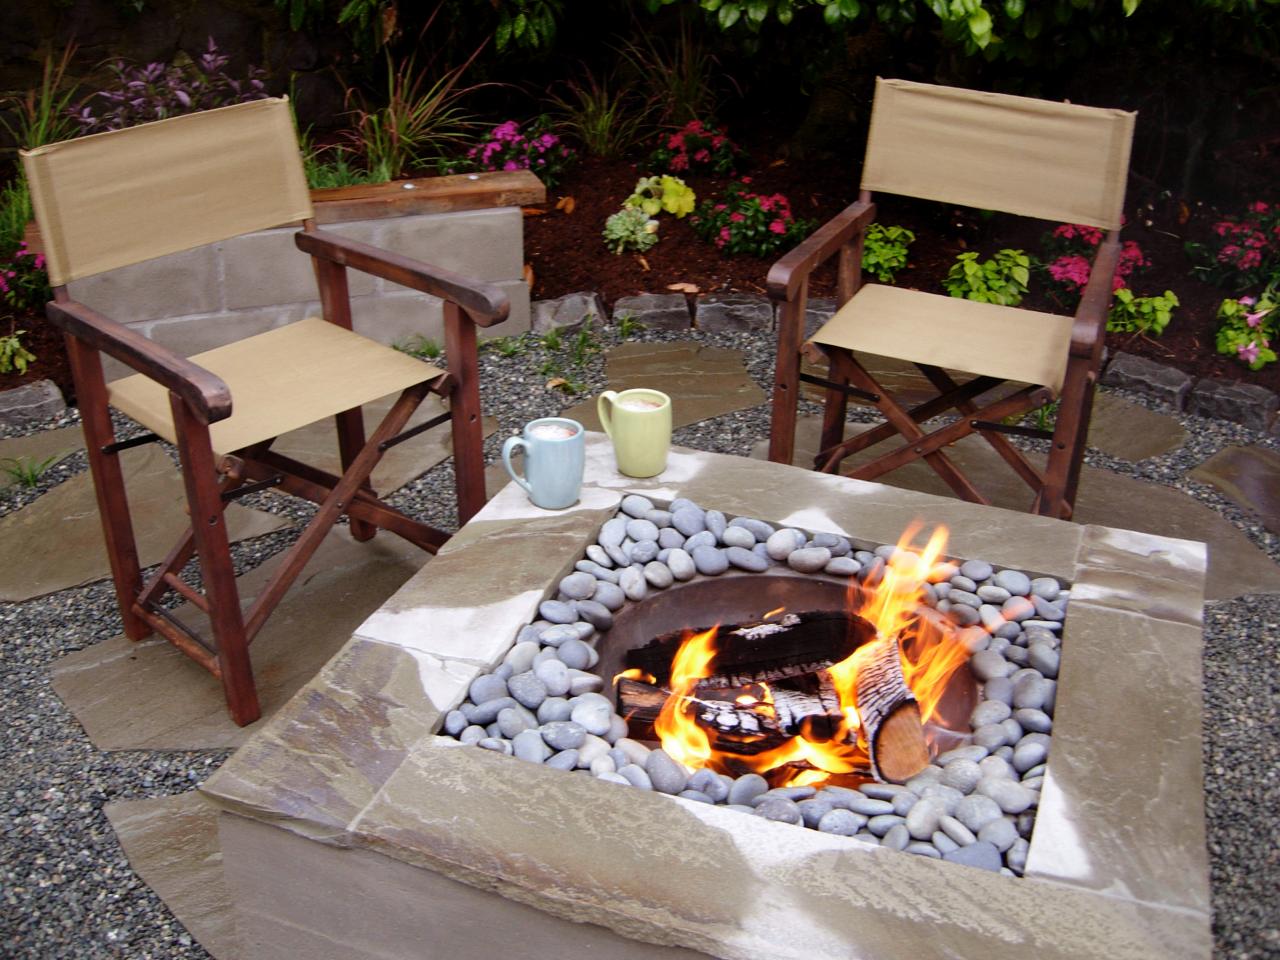 How To Make A Concrete Fire Feature, How To Make A Fire Pit At Home